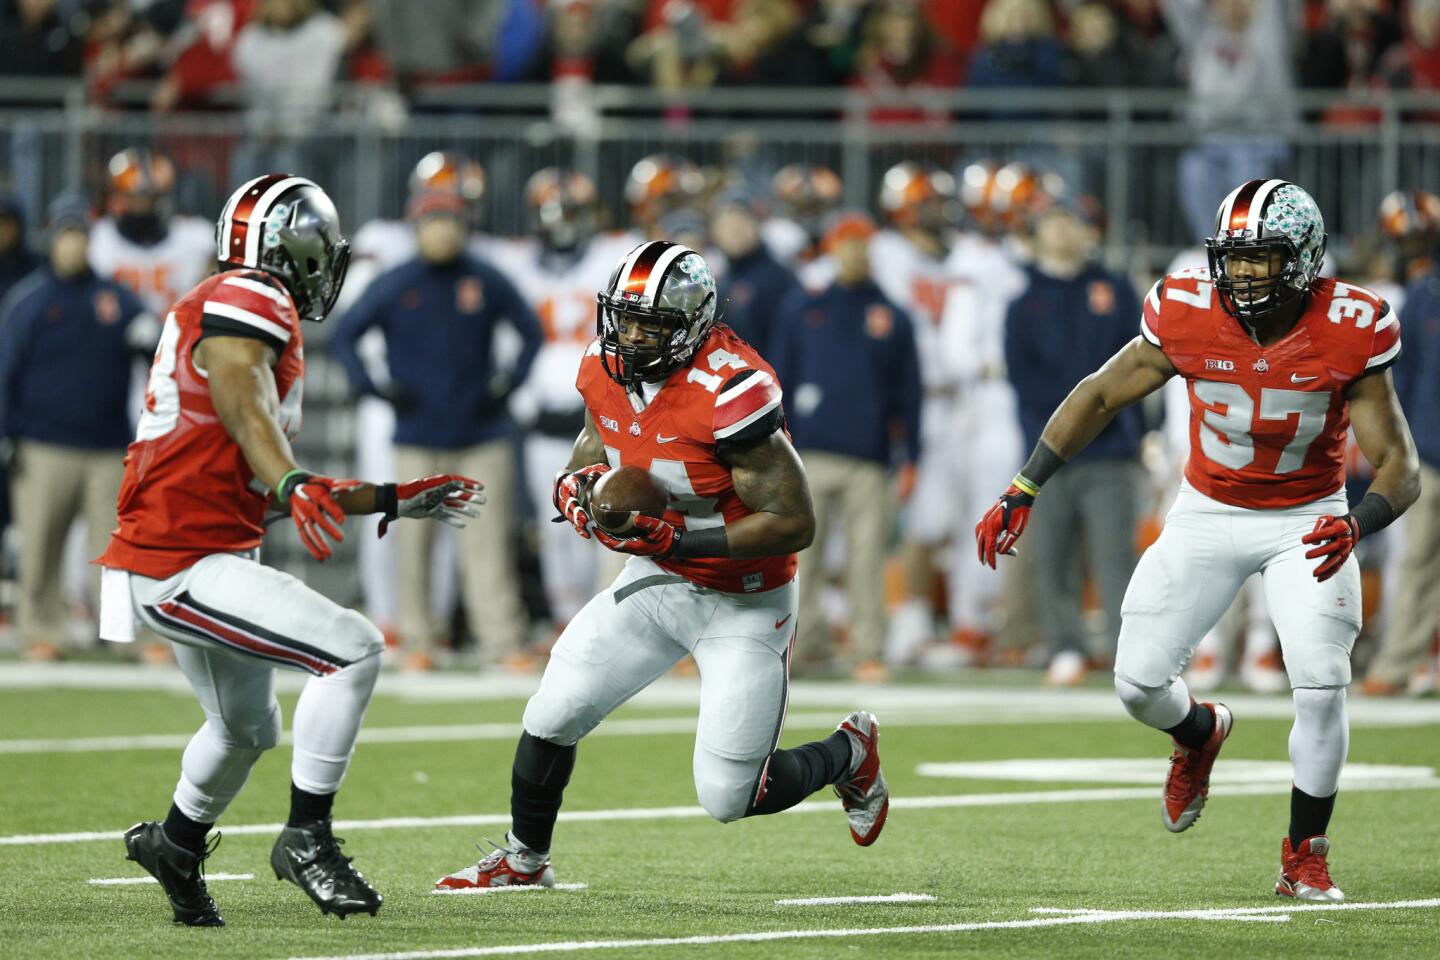 Ohio State's Curtis Grant runs with the ball after an interception in the first half.